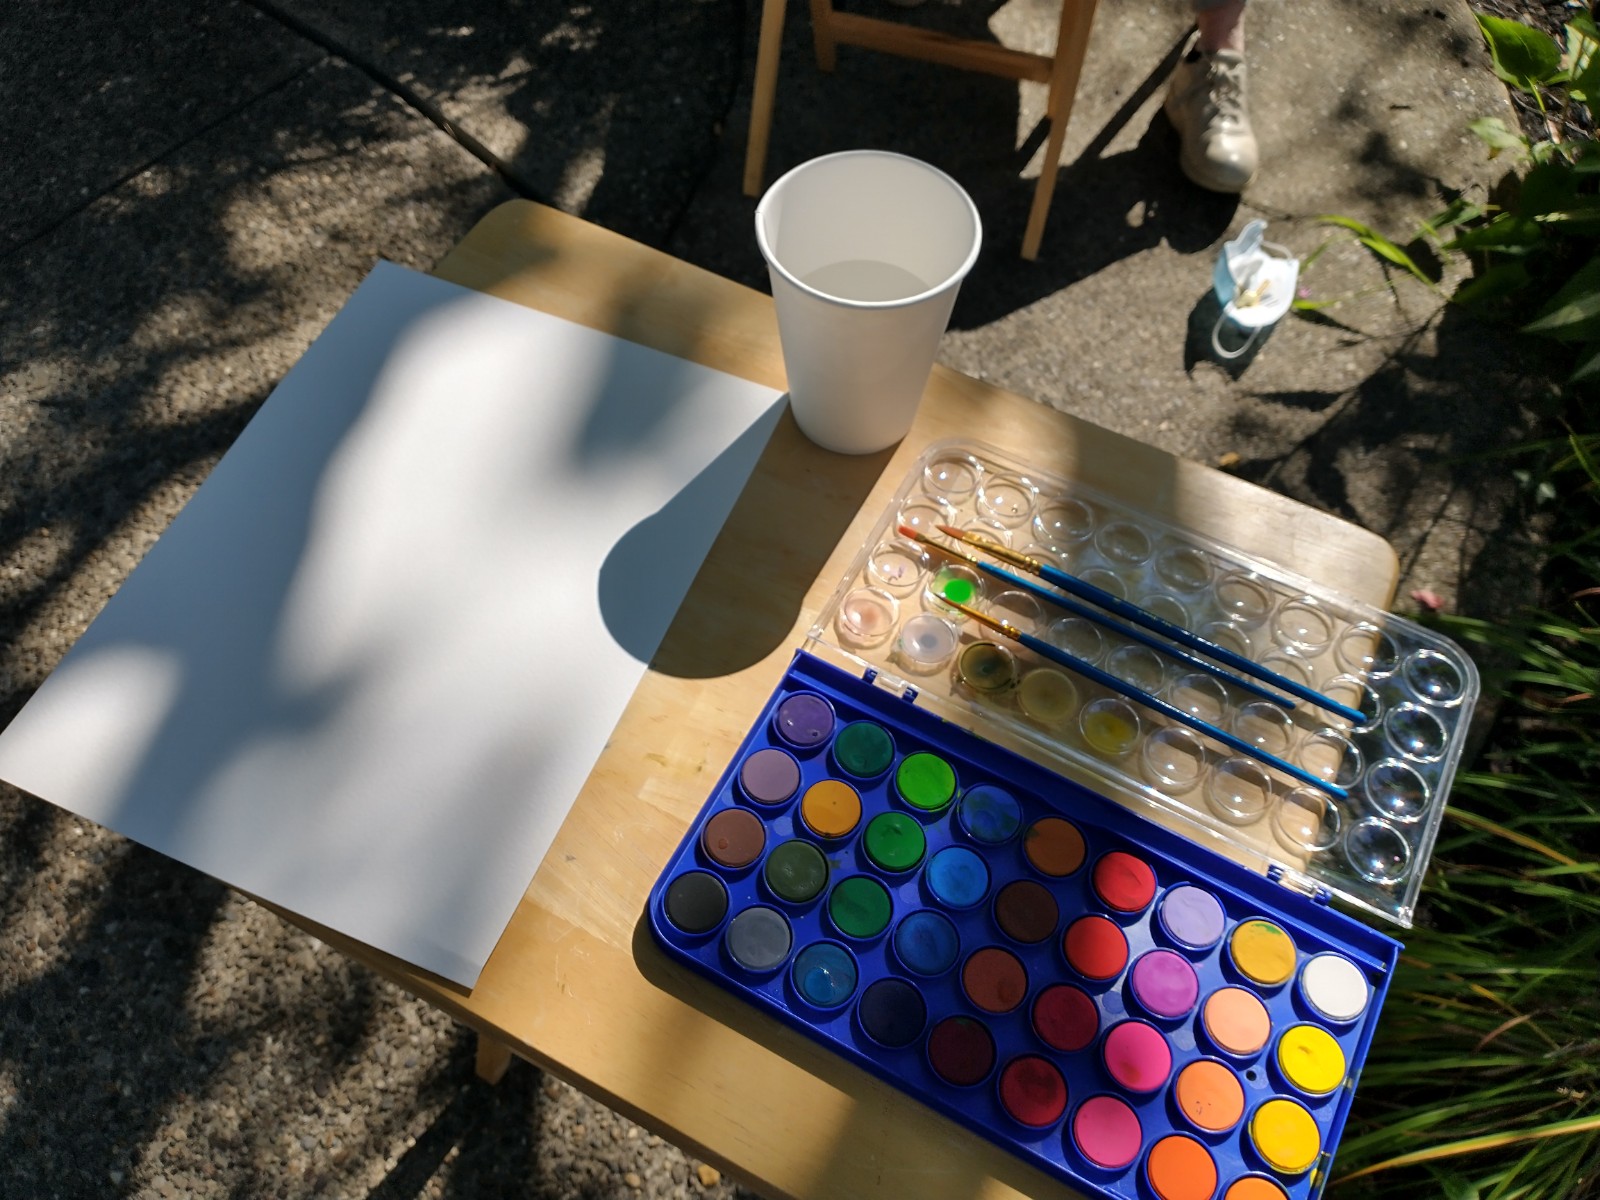 Tray table with a brand-new paint set, brush, watercolor paper, and a cup of water.